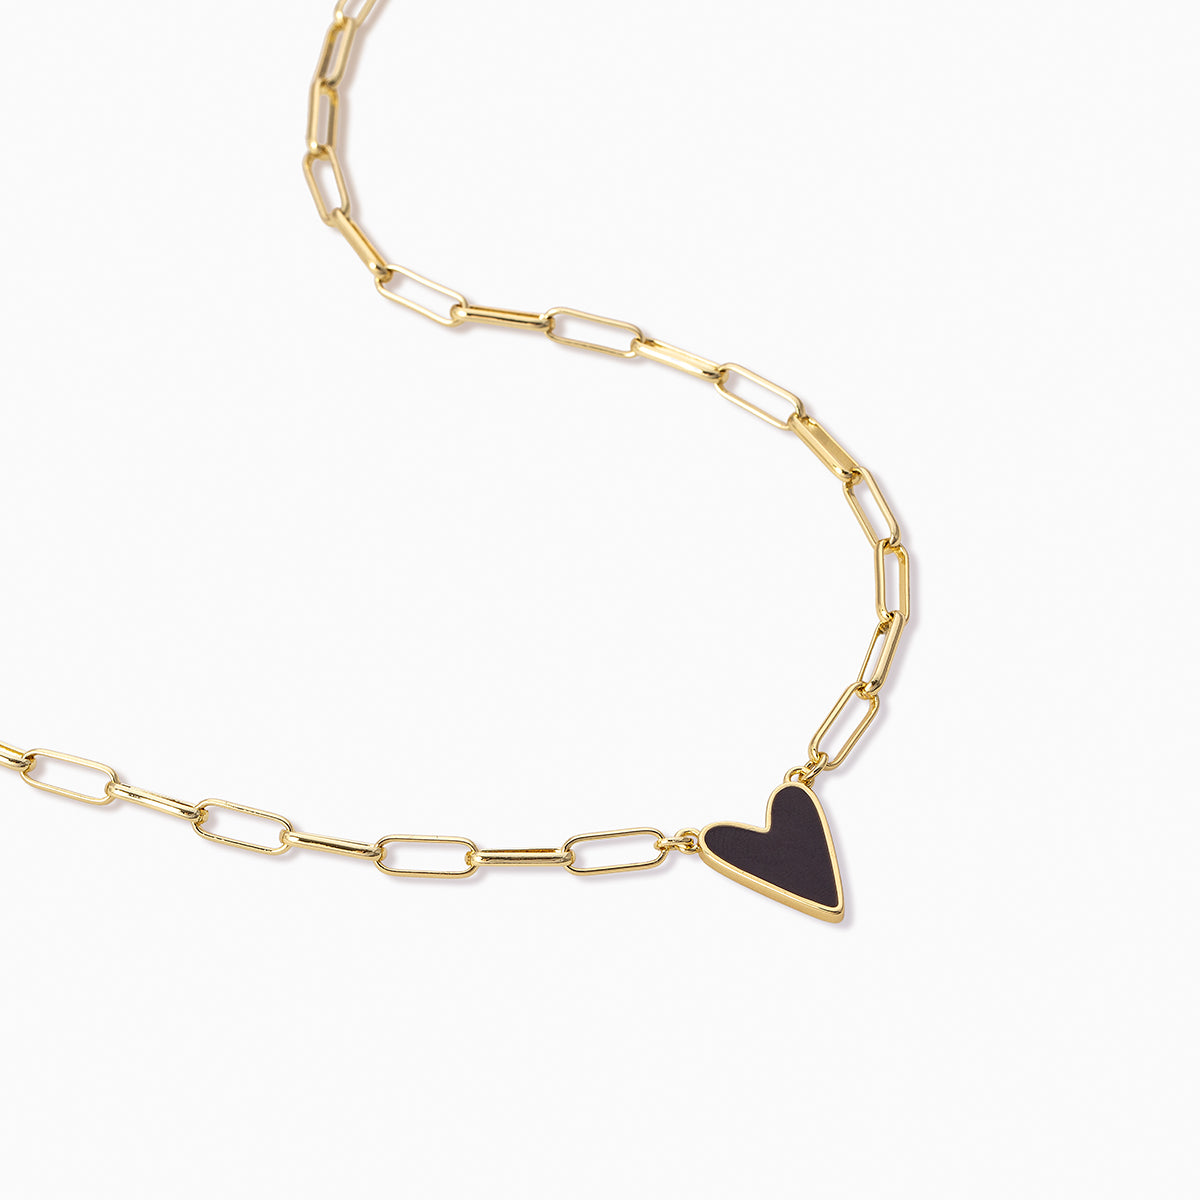 Enamel Heart Necklace | Gold Navy | Product Detail Image | Uncommon James